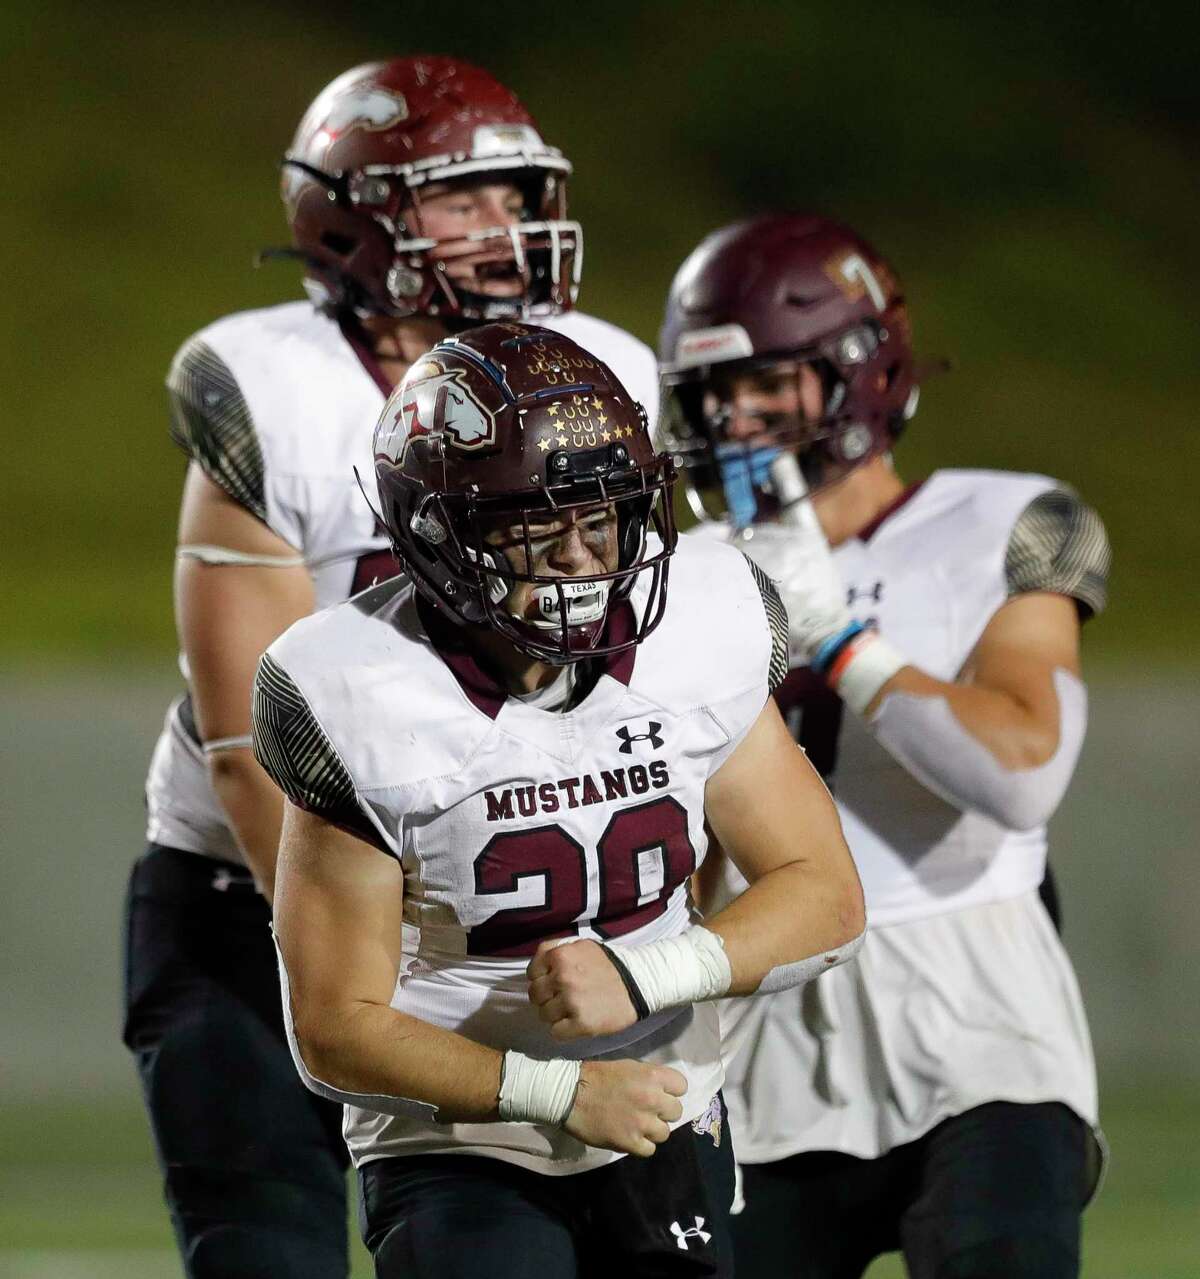 Magnolia West running back Hunter Bilbo (20) reacts after converting a fourth down during the fourth quarter of a high school football game at Randall Reed Stadium, Friday, Oct. 29, 2021, in New Caney. Magnolia West defeated New Caney 31-24.